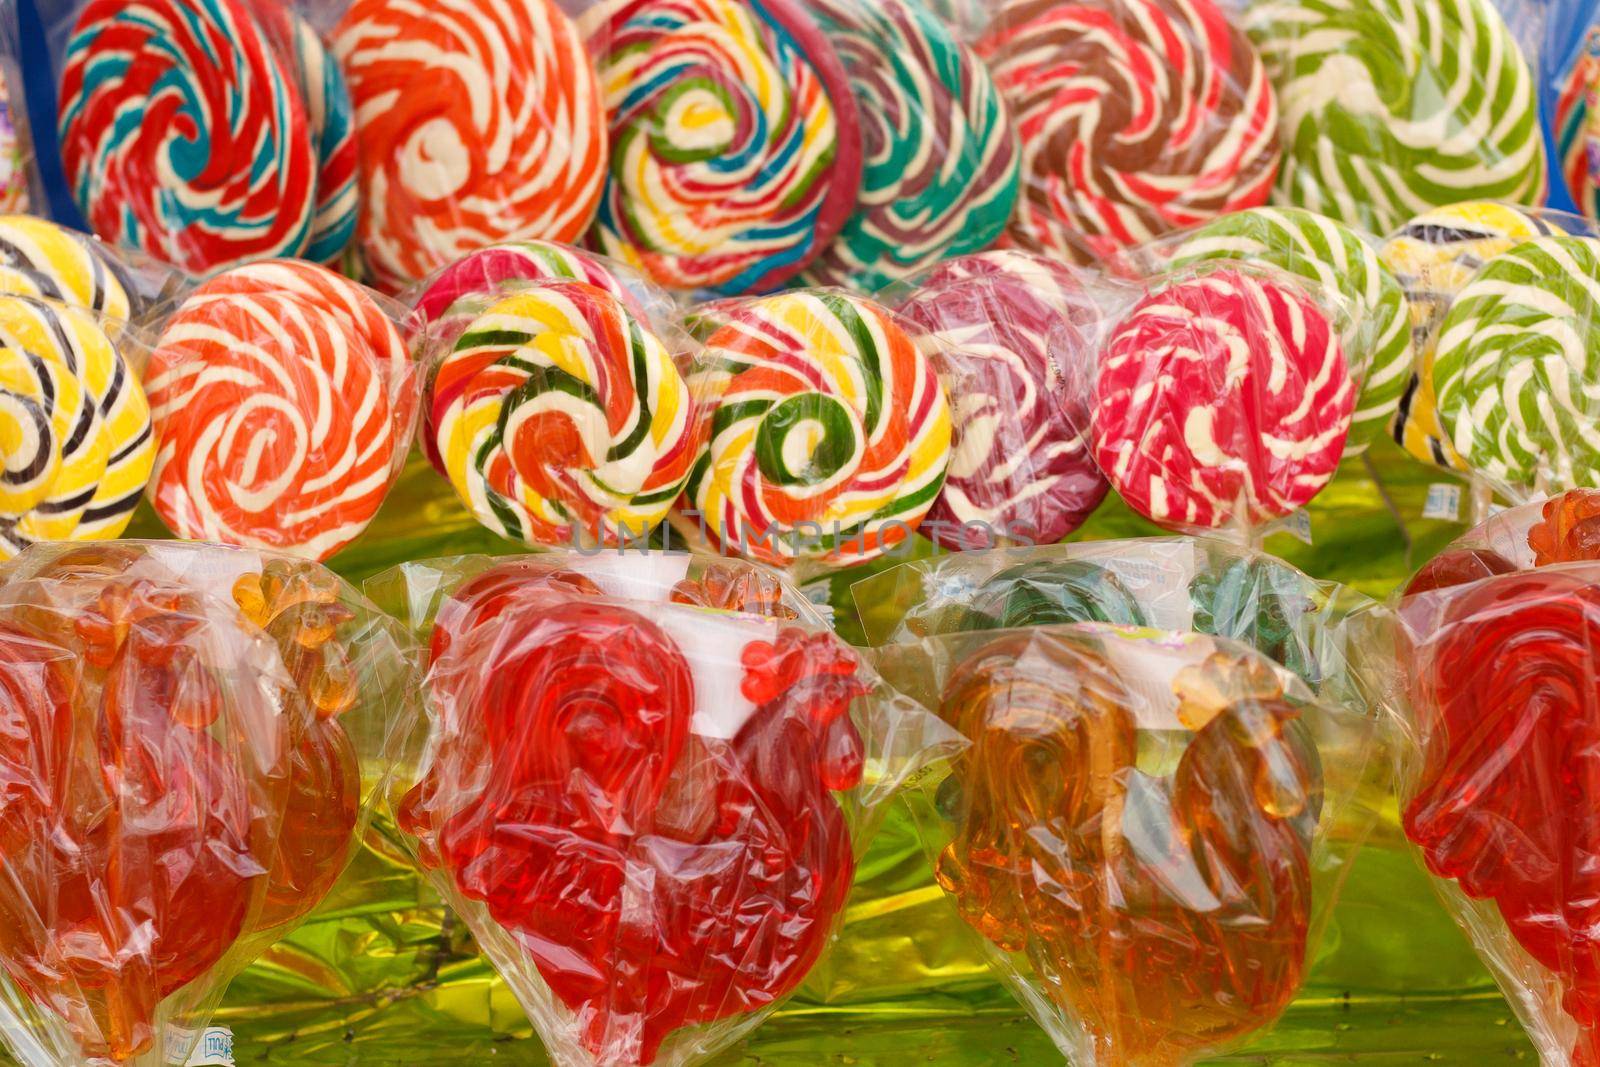 Colorful lollipops in a package. Lots of lollipops on the counter.Selective focus